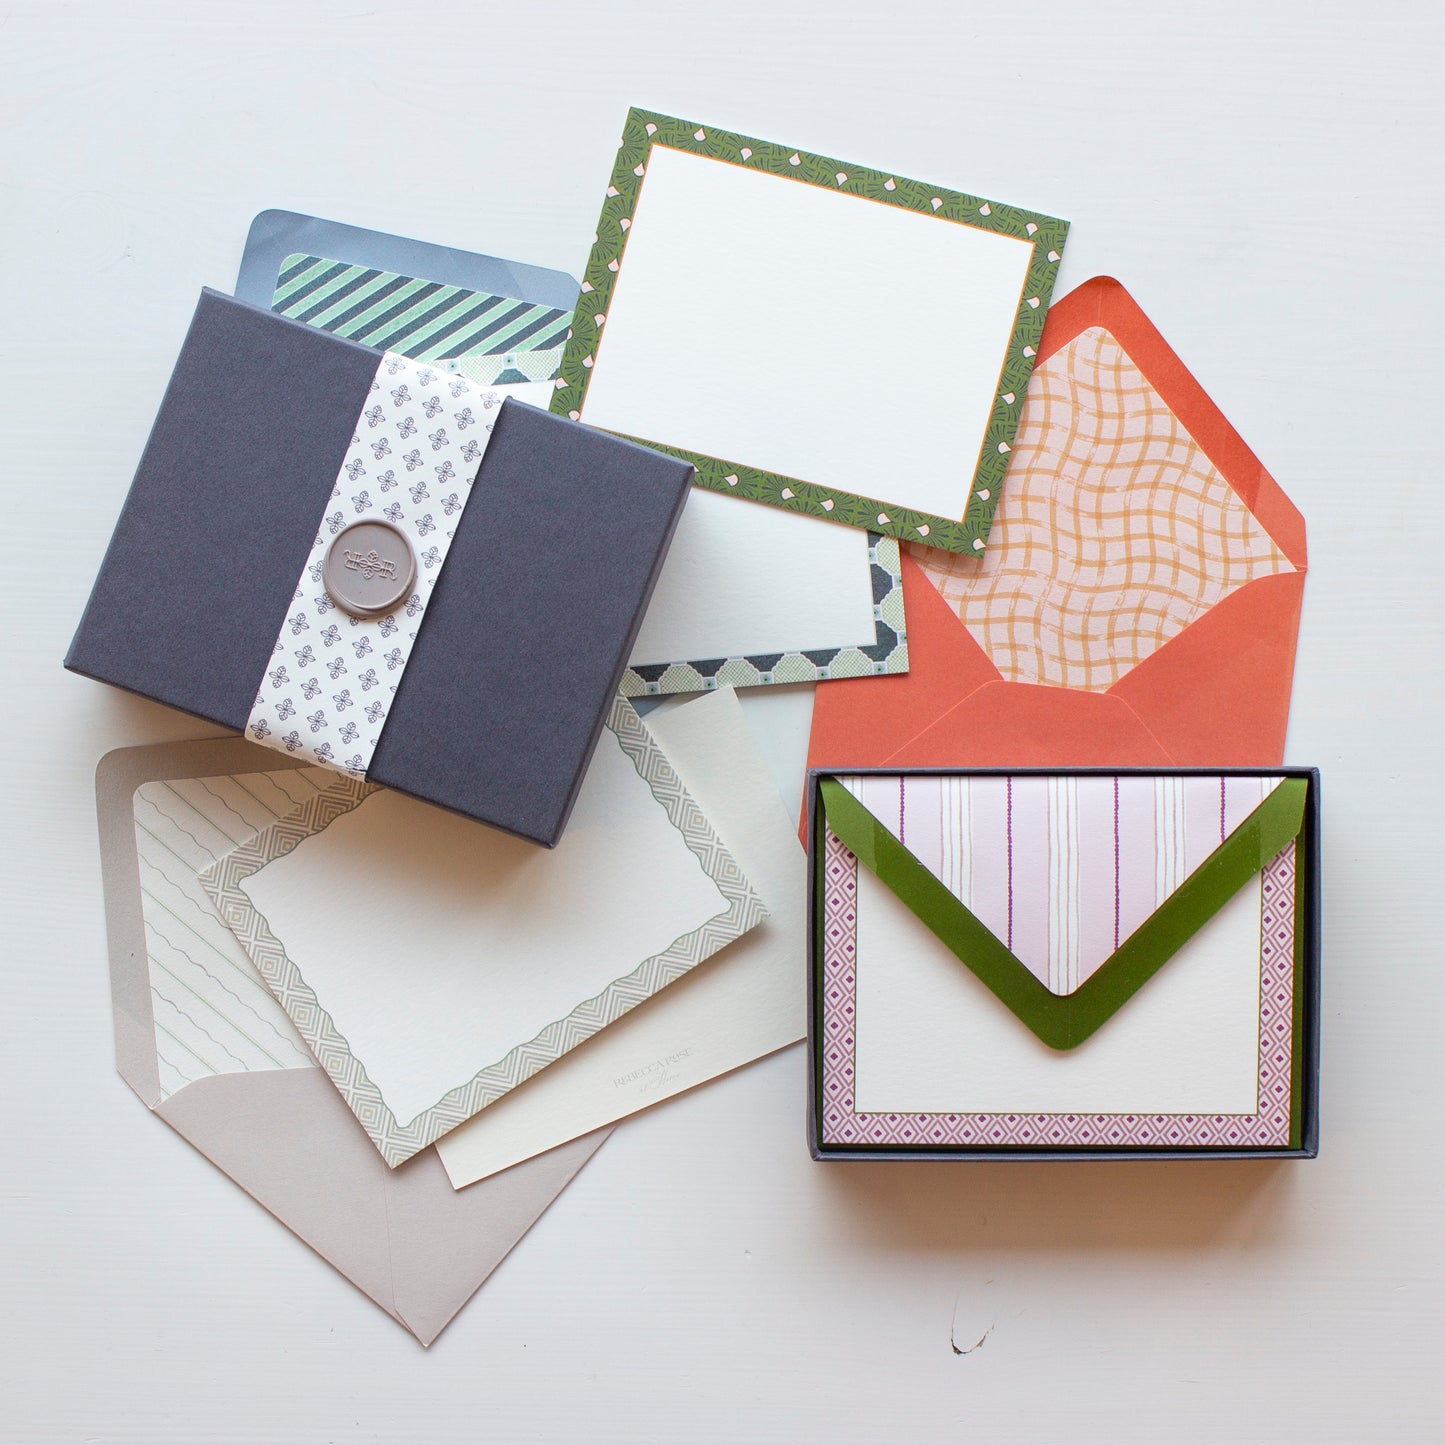 An overhead photo of all Rebecca Rose at Home pattern play stationery cards and envelopes, displaying gift box presentation.